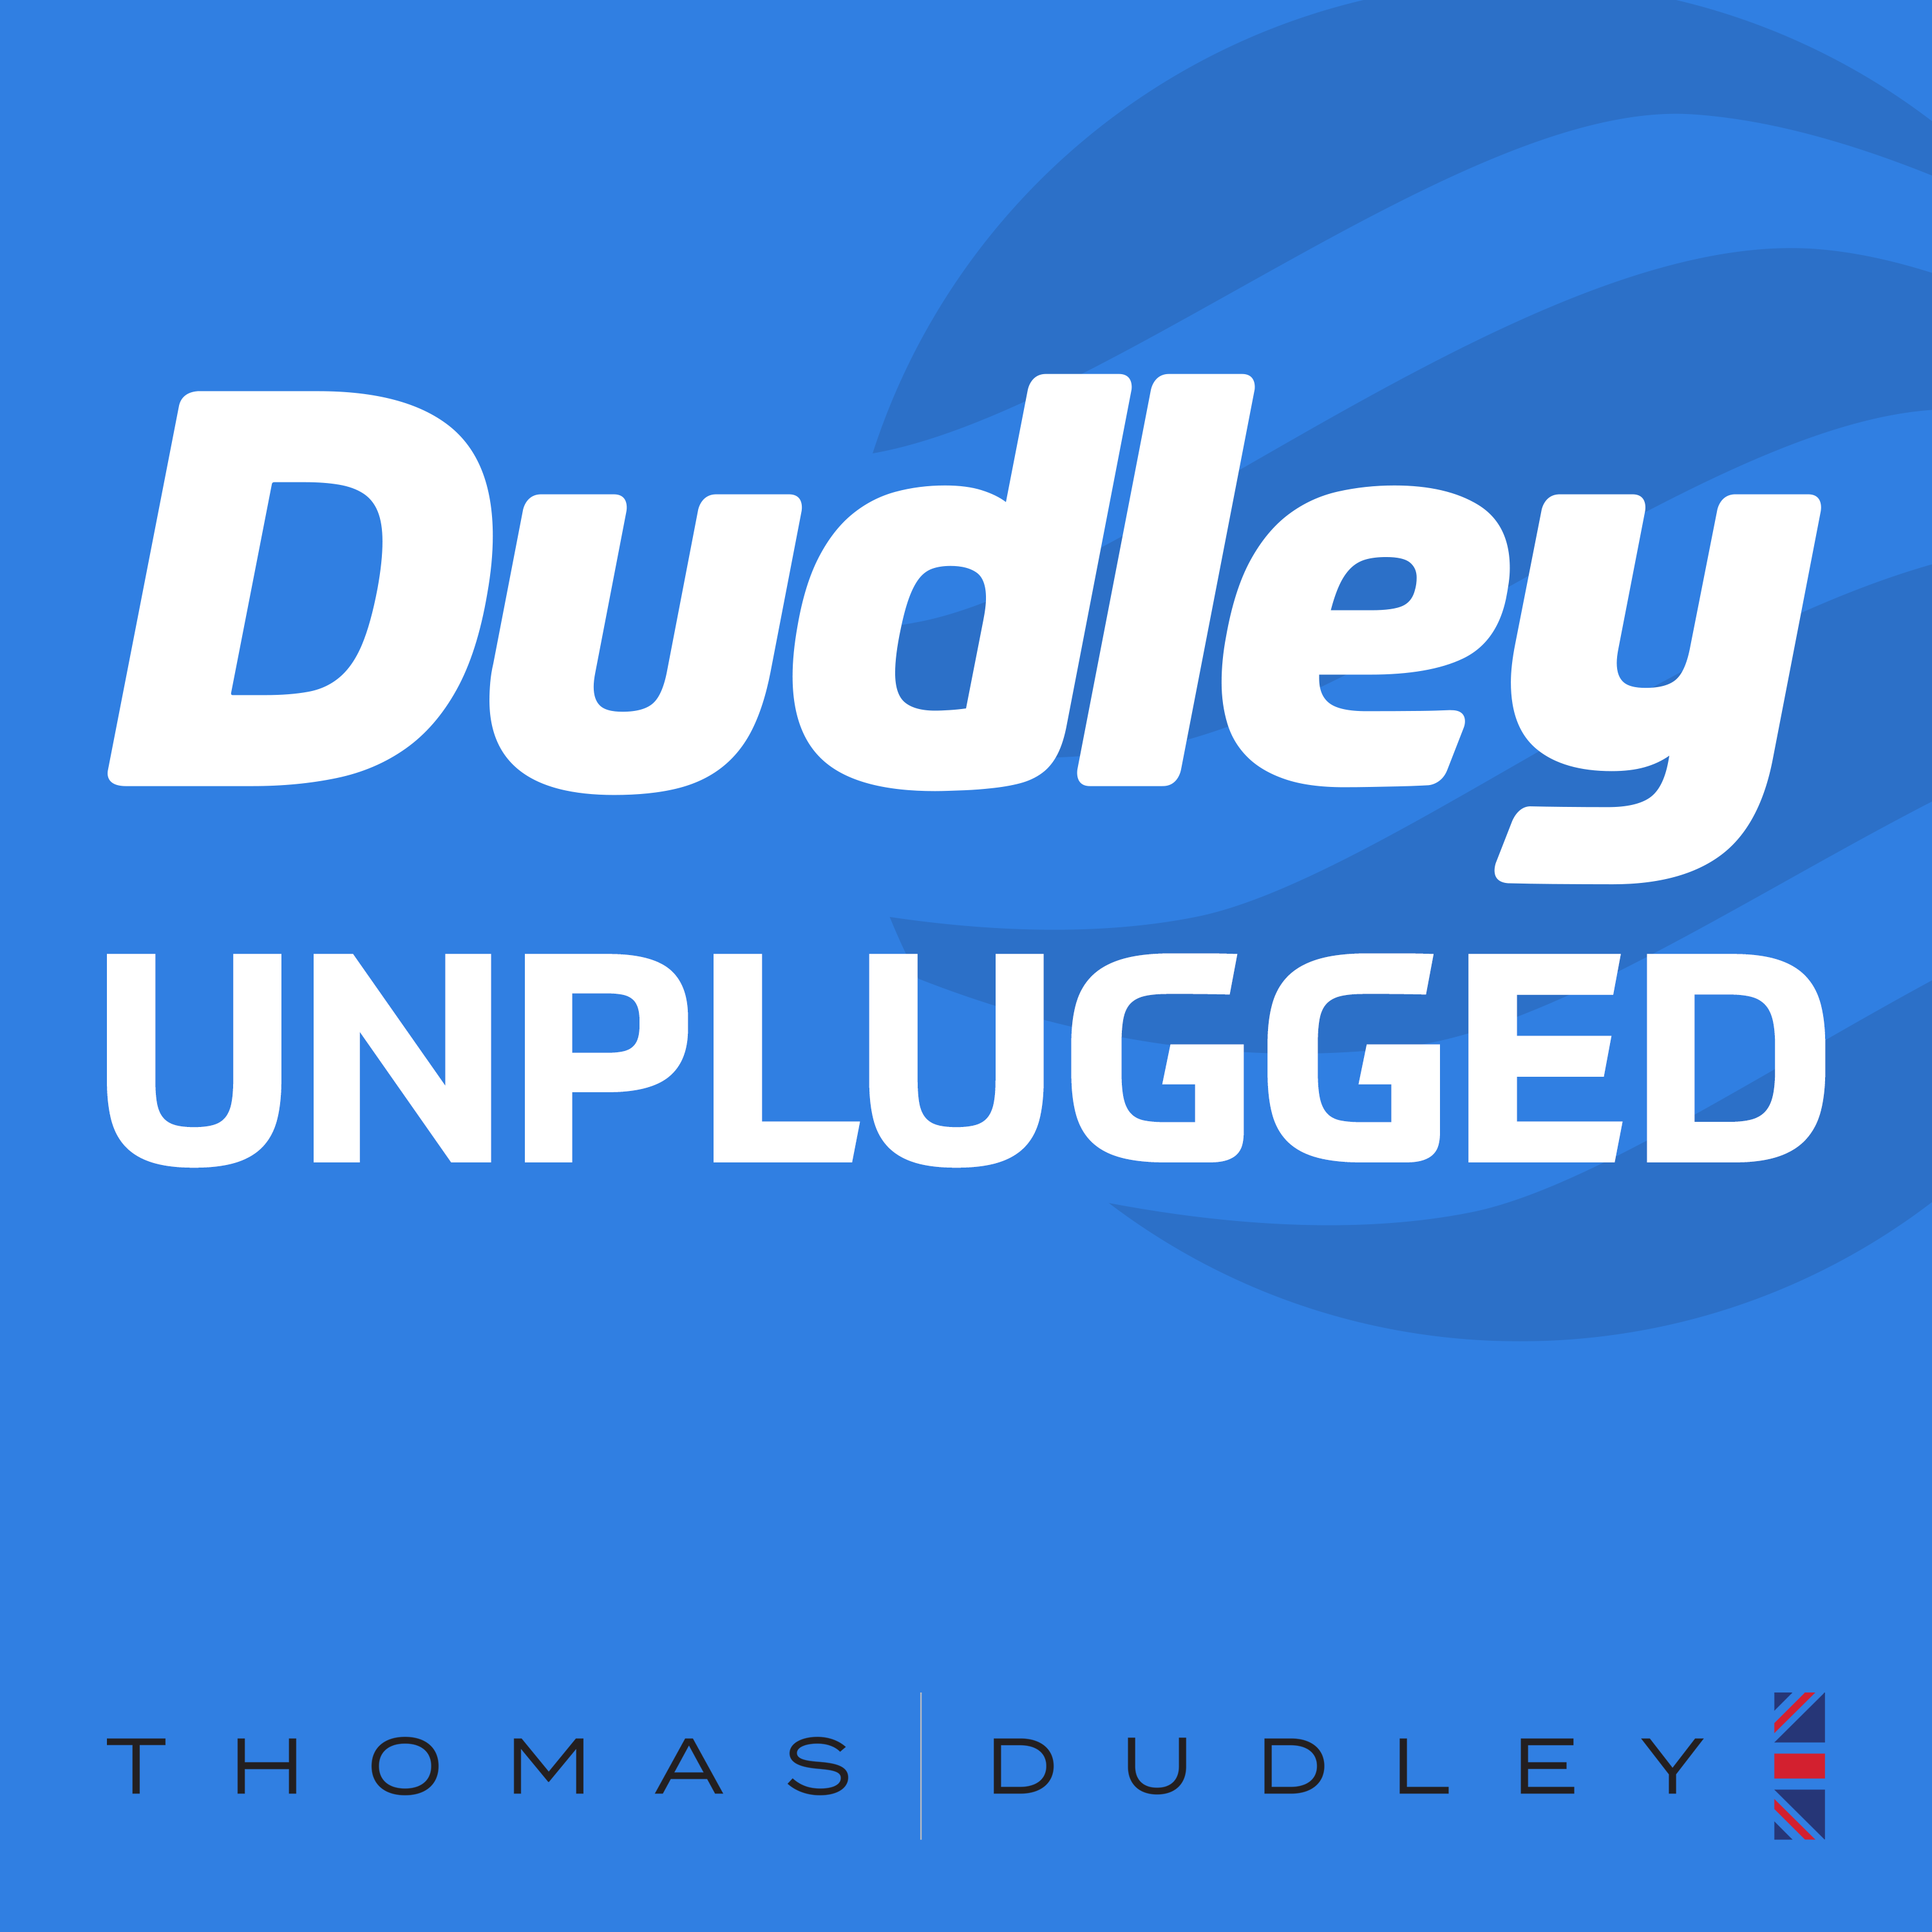 Artwork for Dudley Unplugged